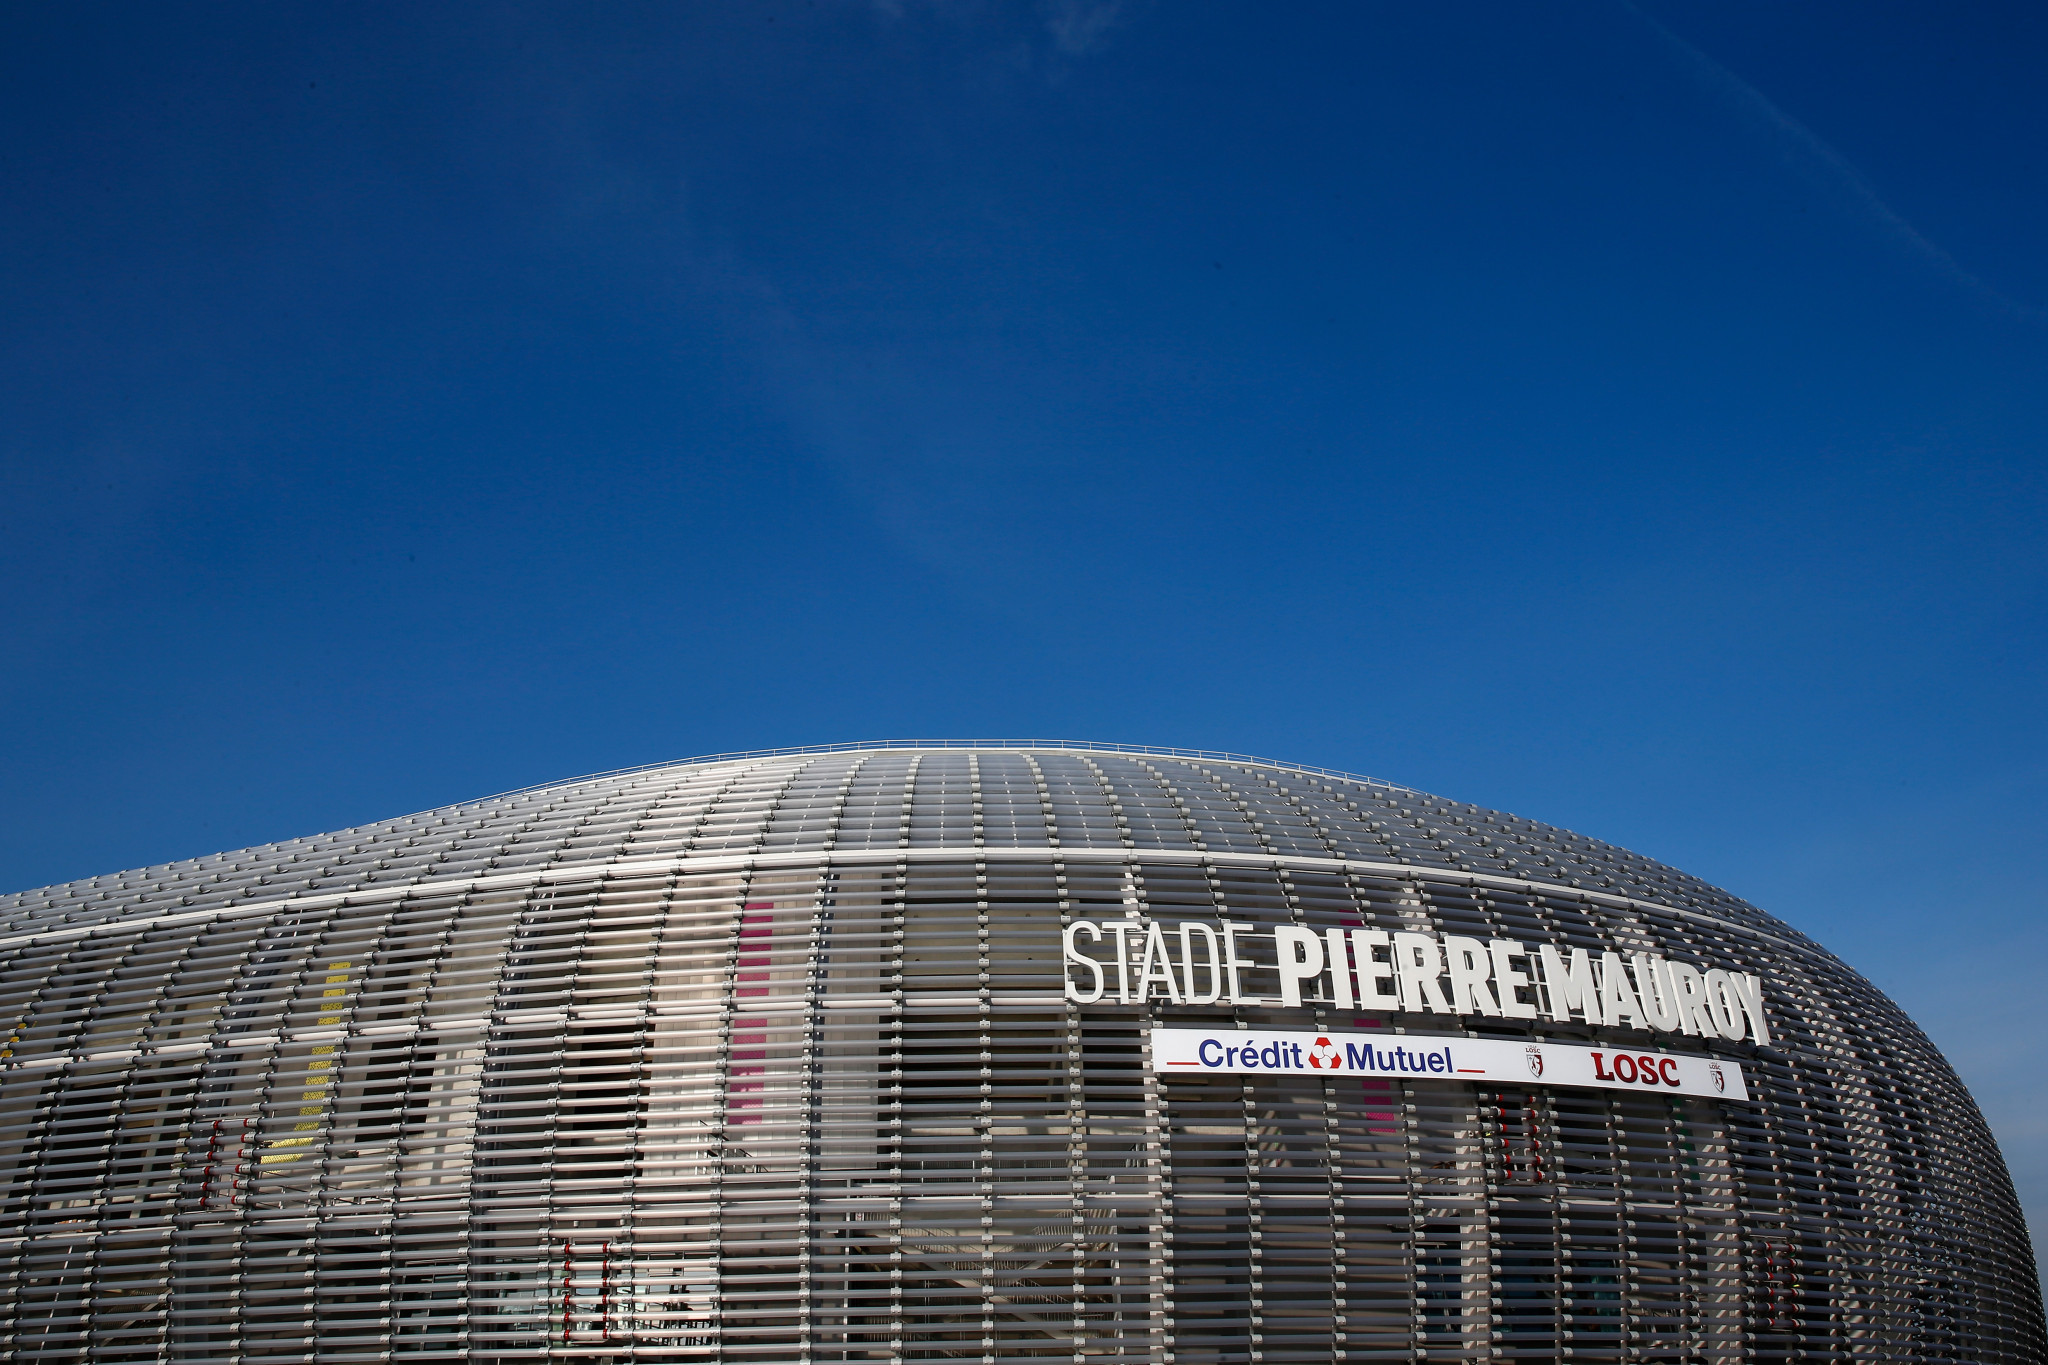 Paris 2024 has proposed moving preliminary phase basketball matches to Lille, but no decision on final approval was taken by the IOC Executive Board ©Getty Images